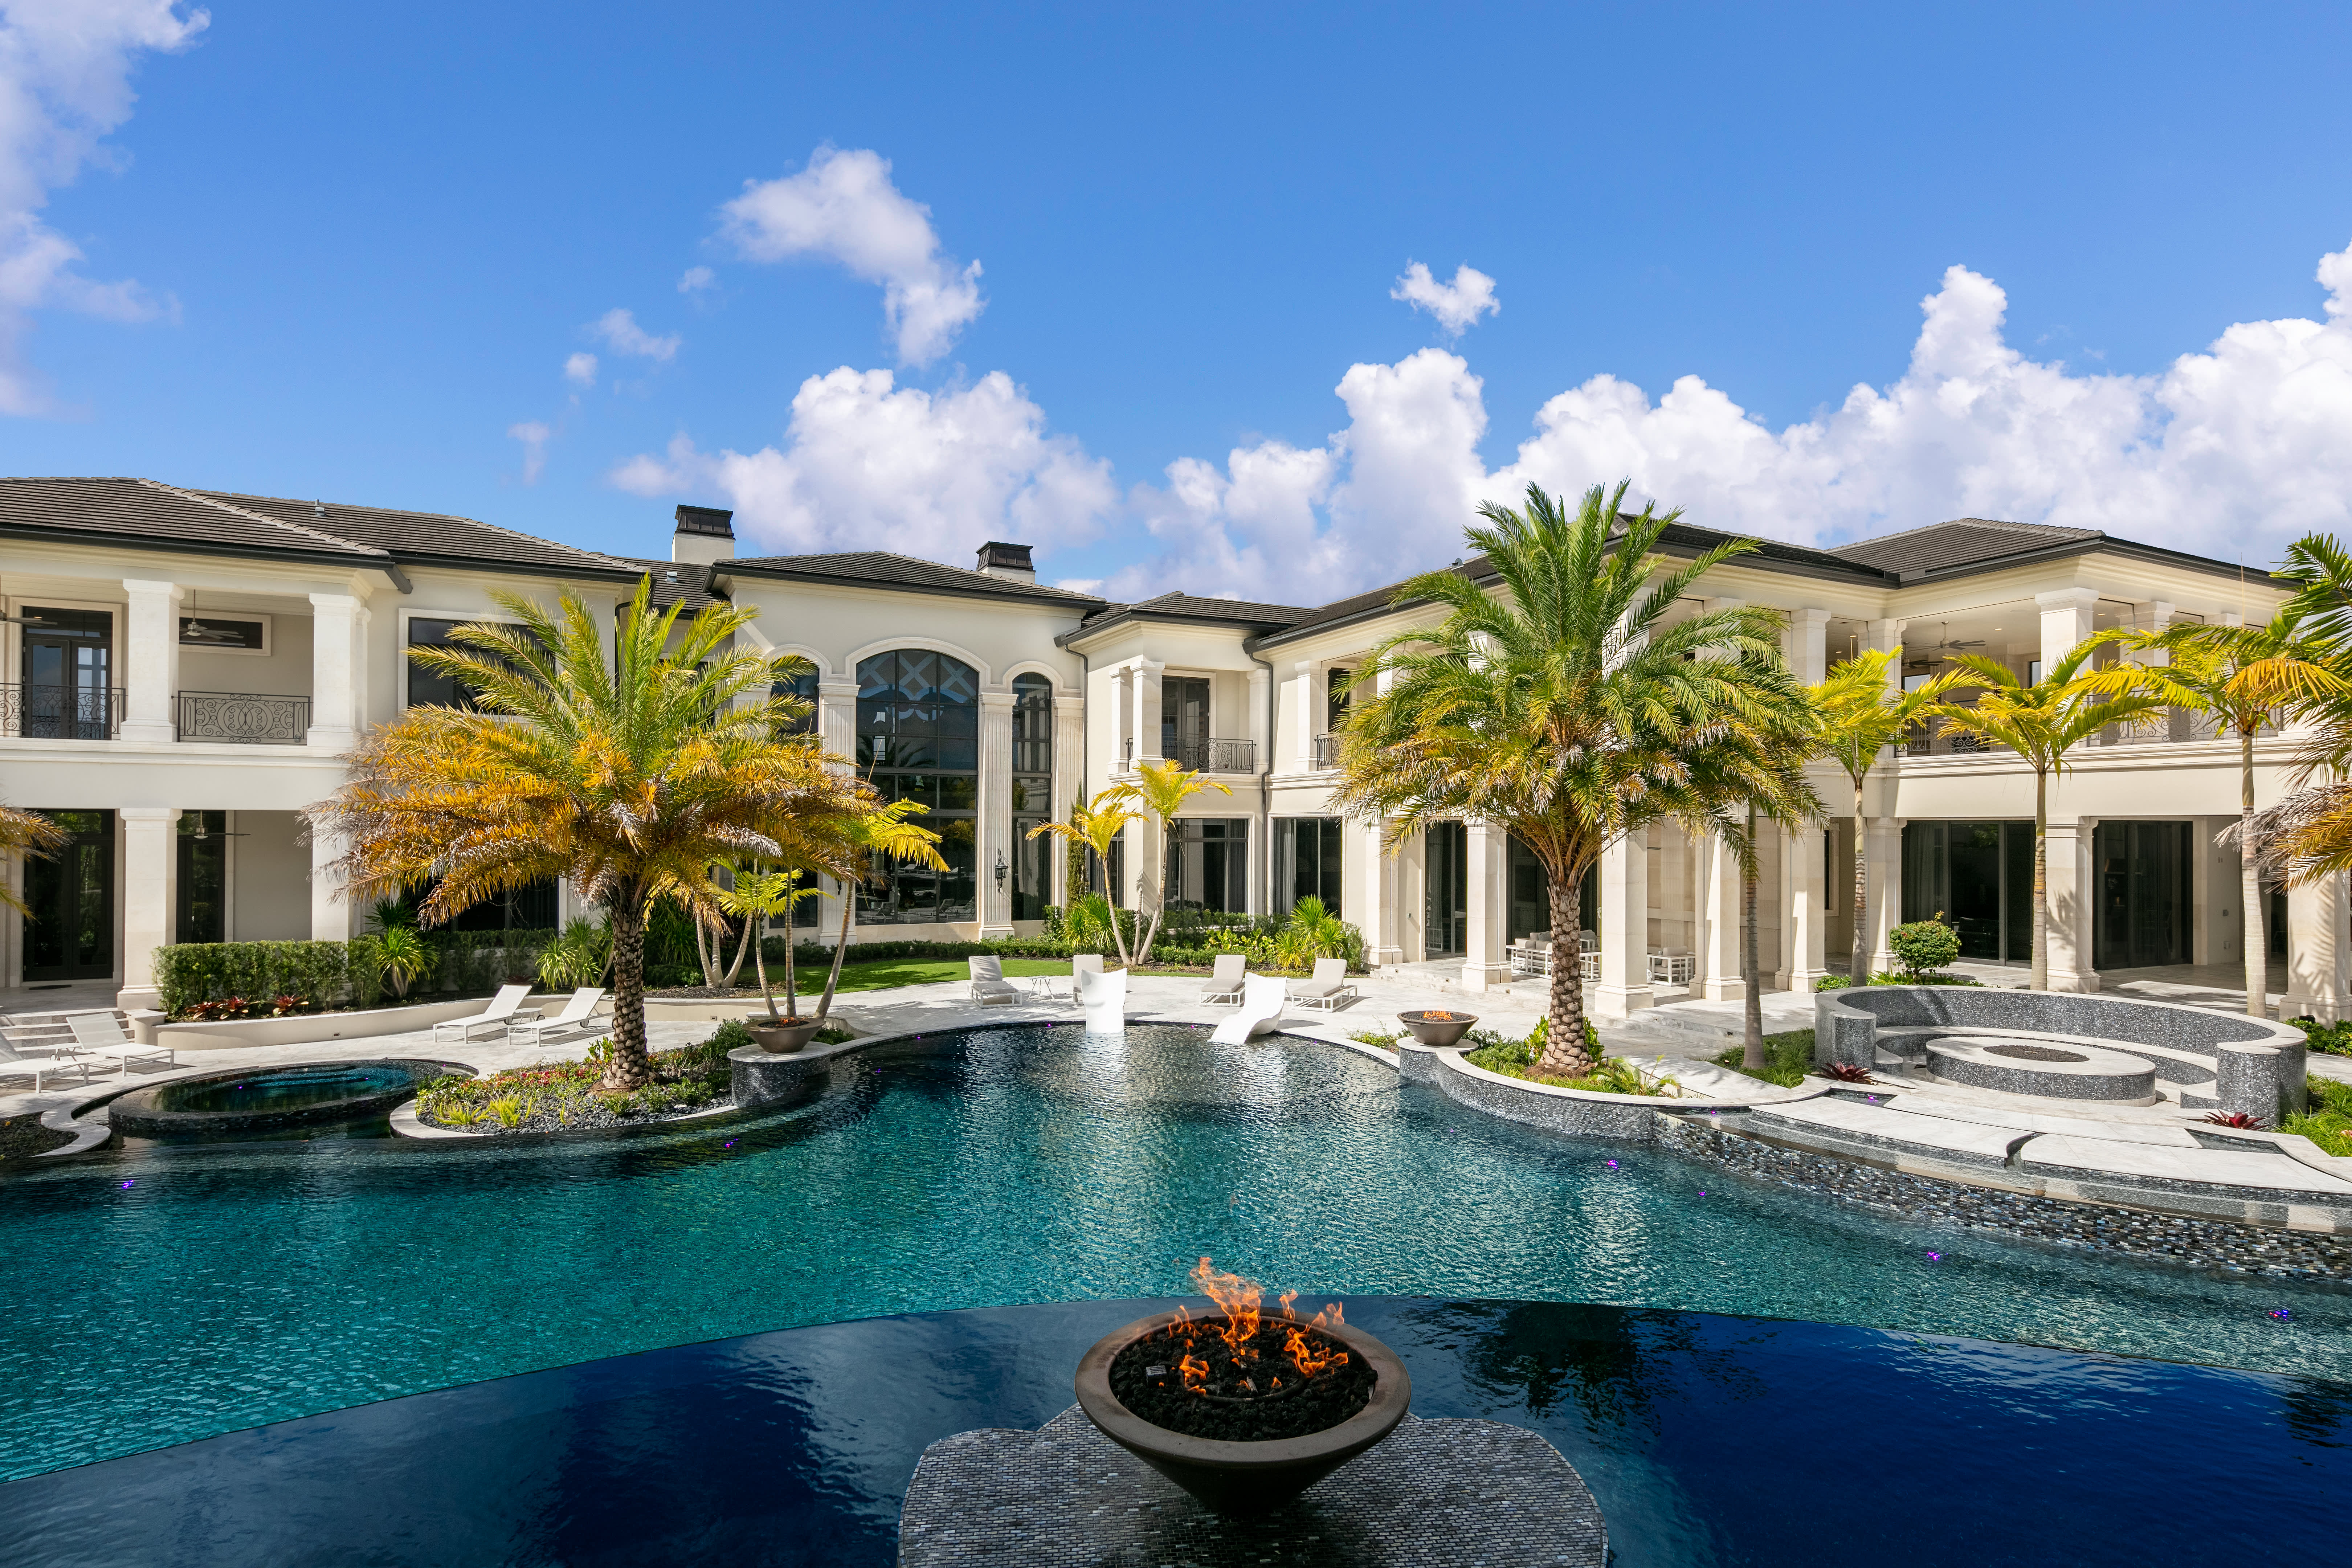 $ 19 million mansion sold in Delray Beach, setting new home sales record